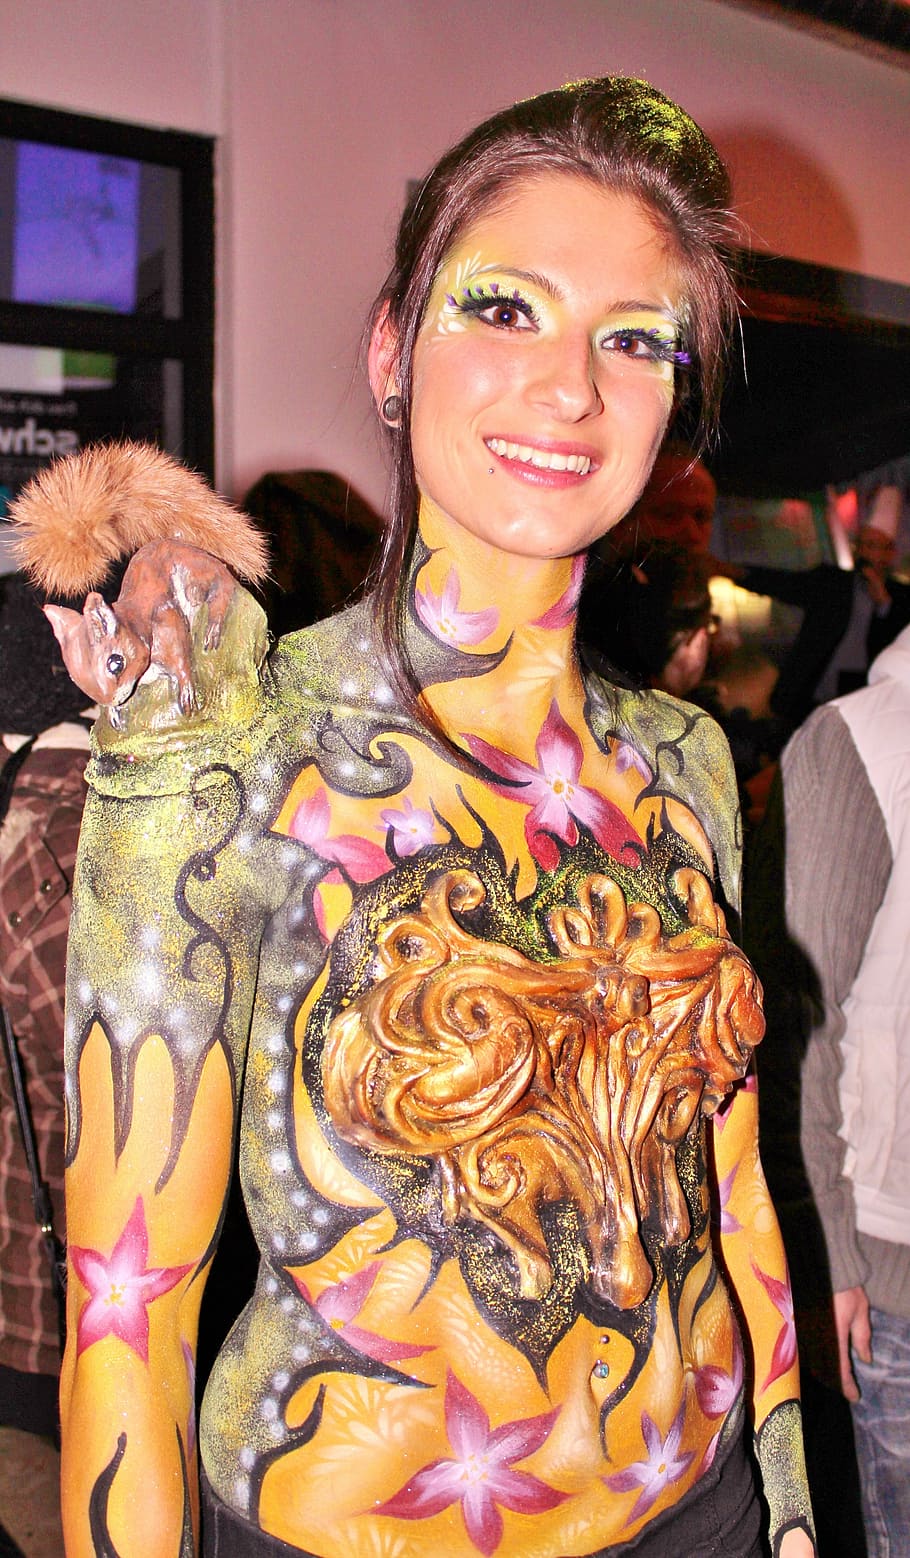 body painting, painting, magical, artists, beautification, artwork, portrait, smiling, women, looking at camera